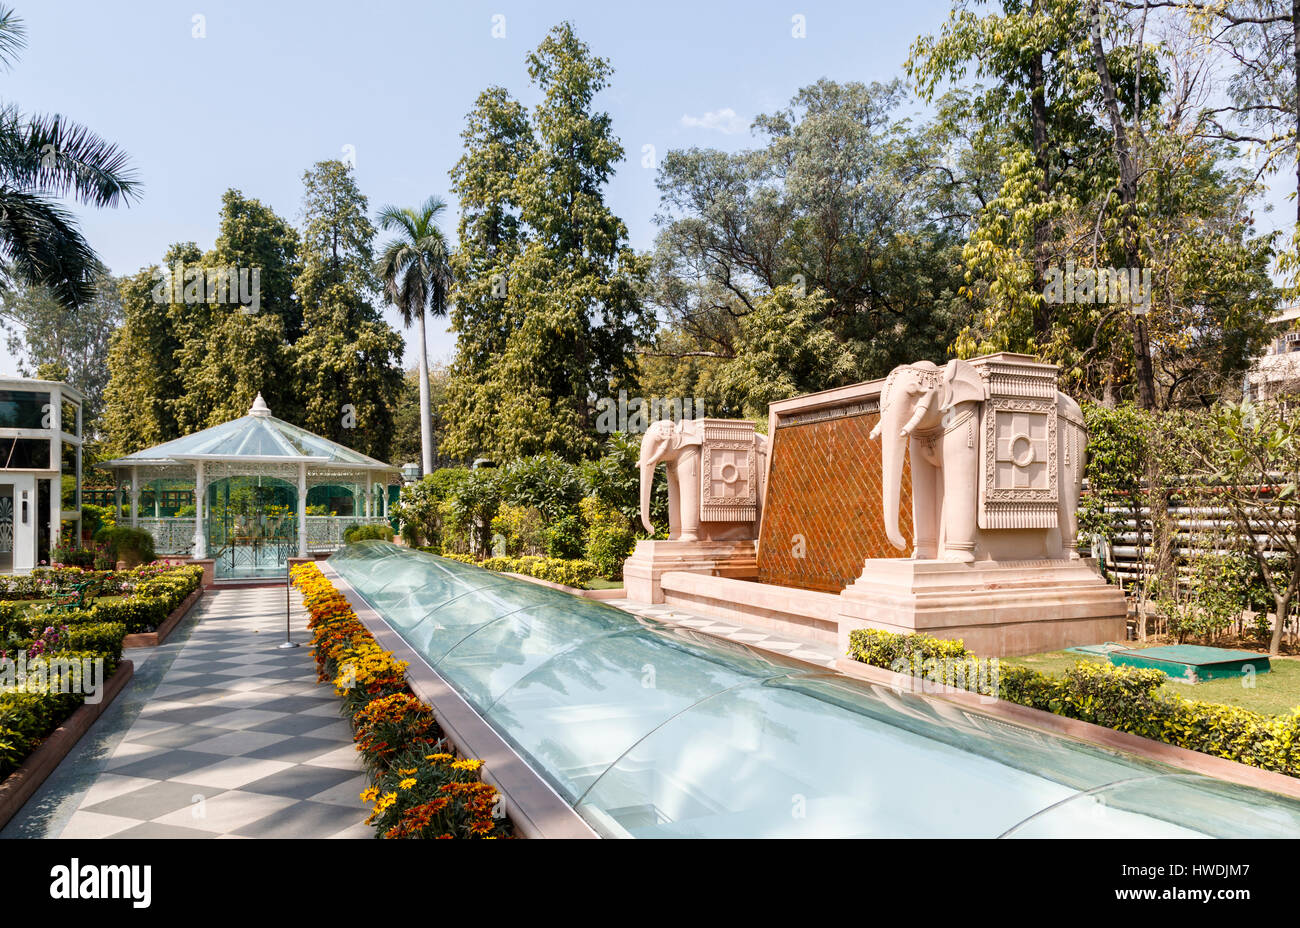 Elephant statues in the gardens of the 5 star luxury Imperial Hotel, New Delhi, capital city of India Stock Photo